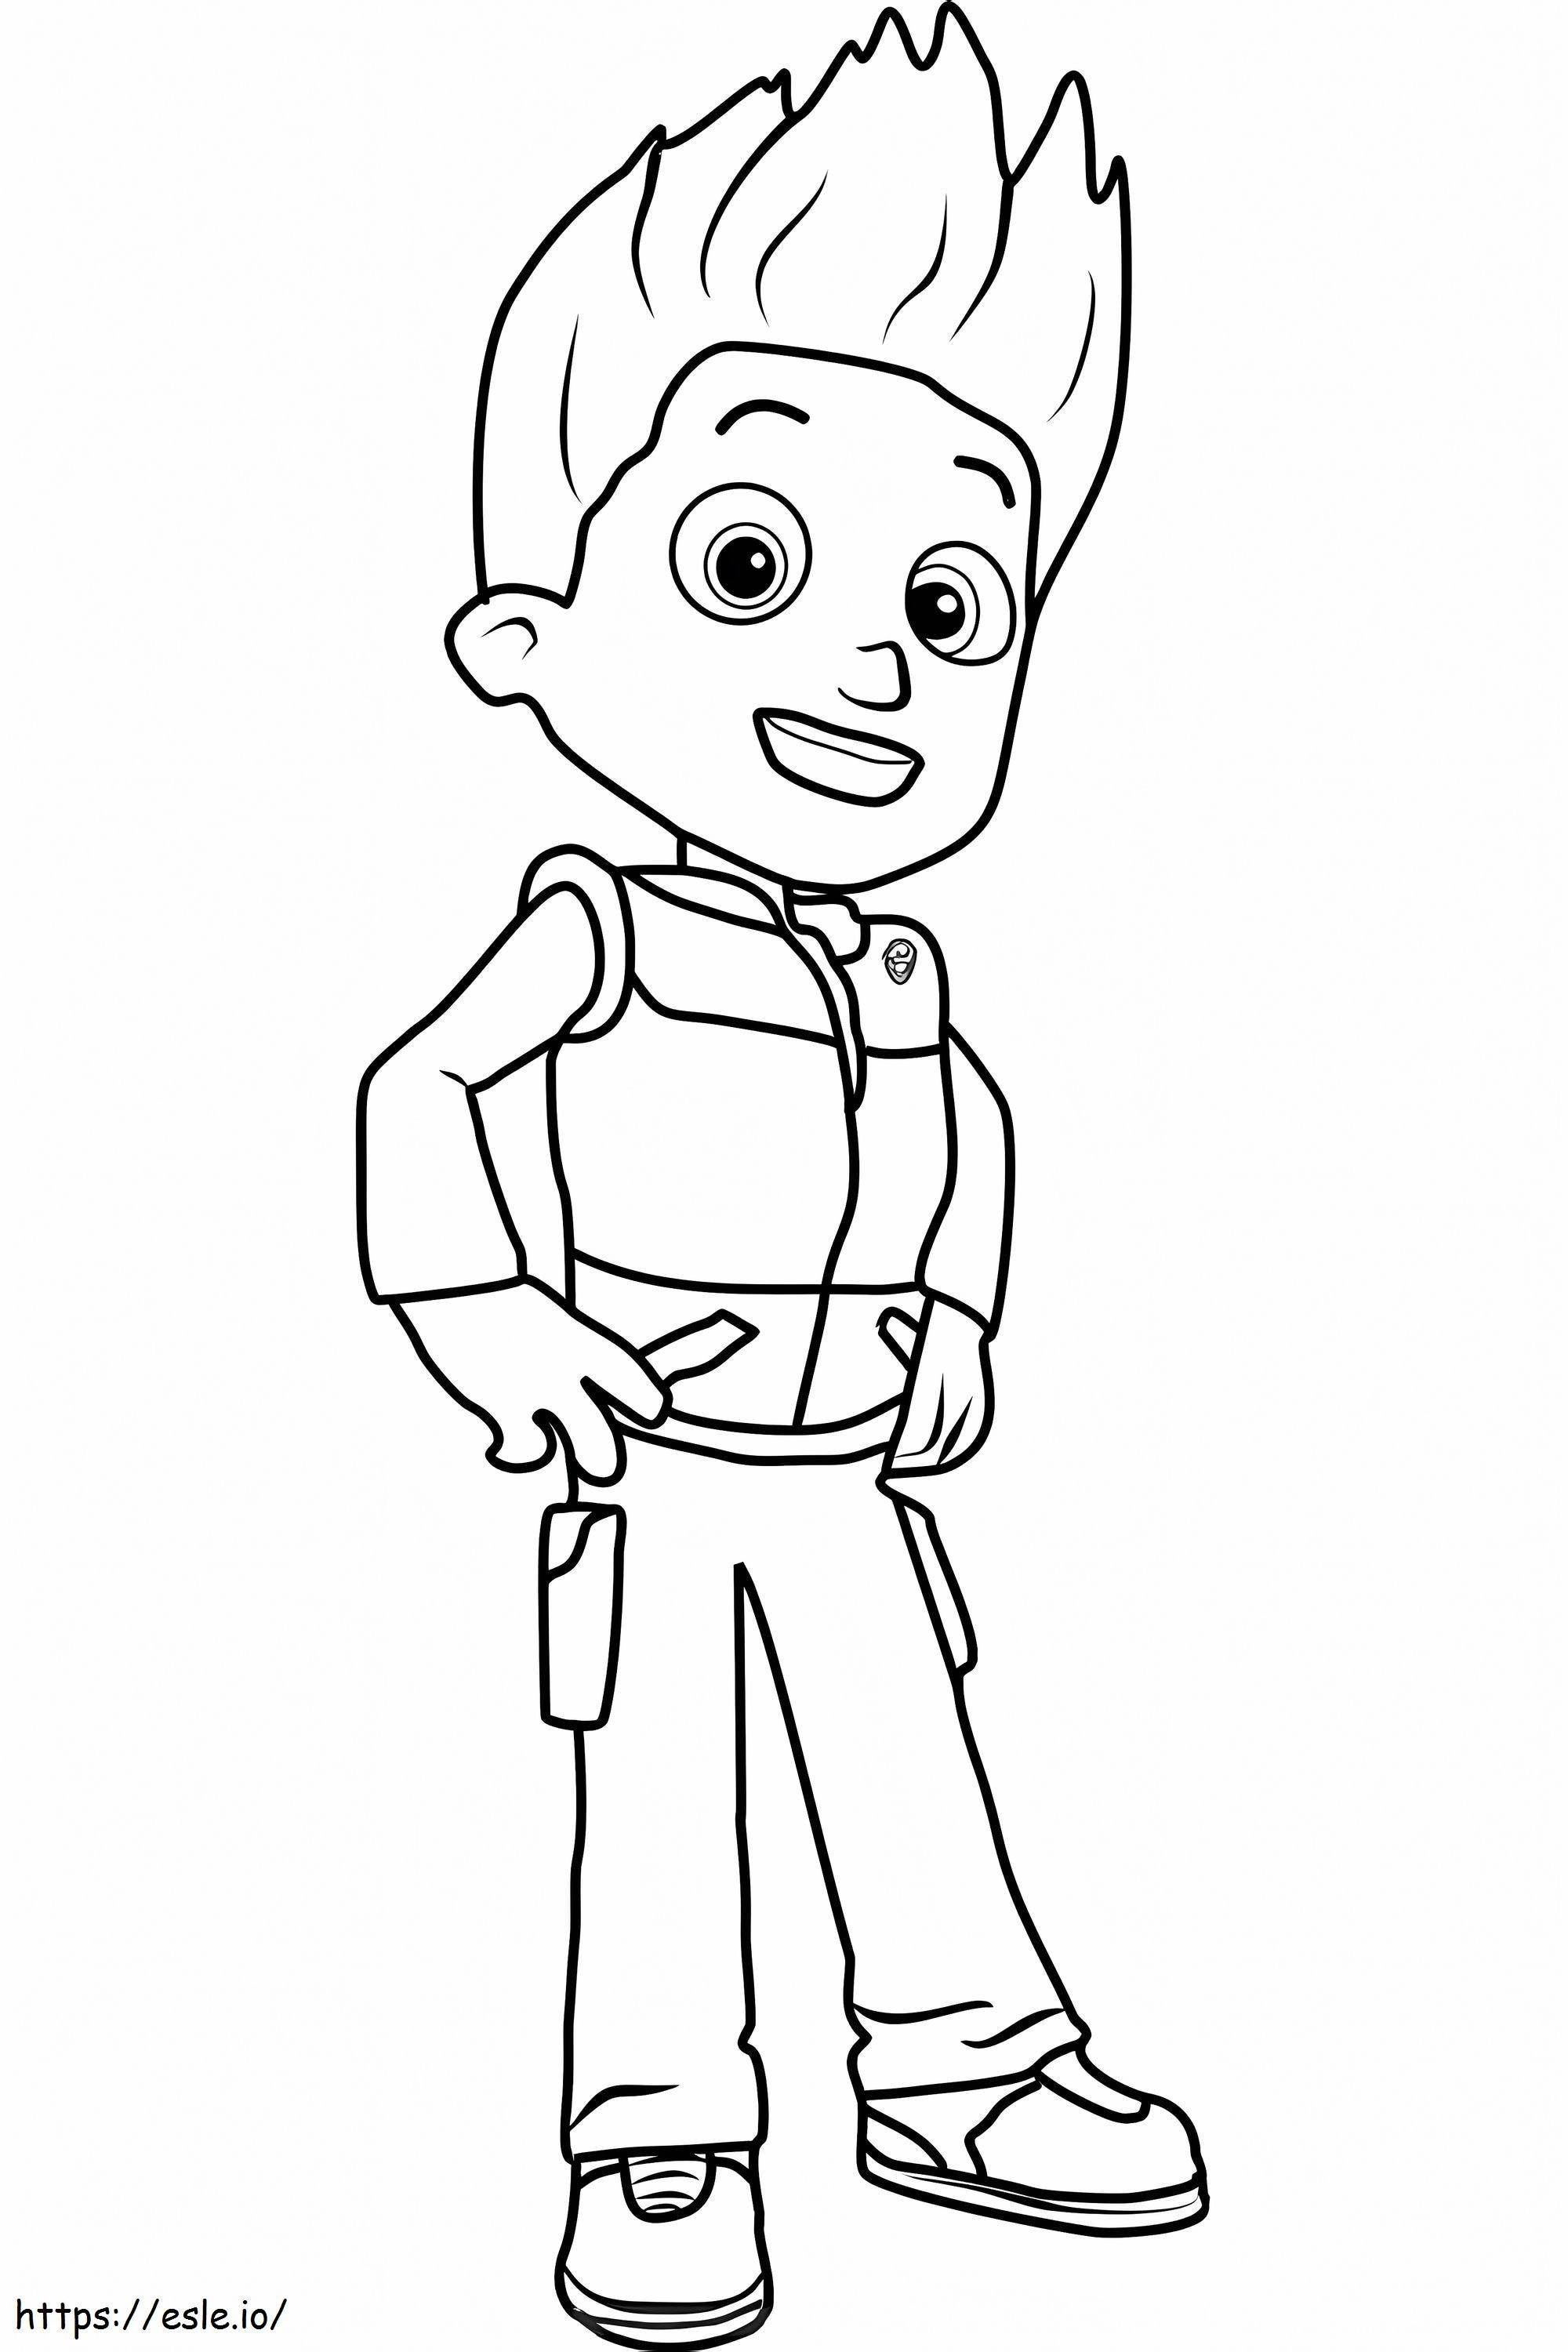 Ryder 2 coloring page